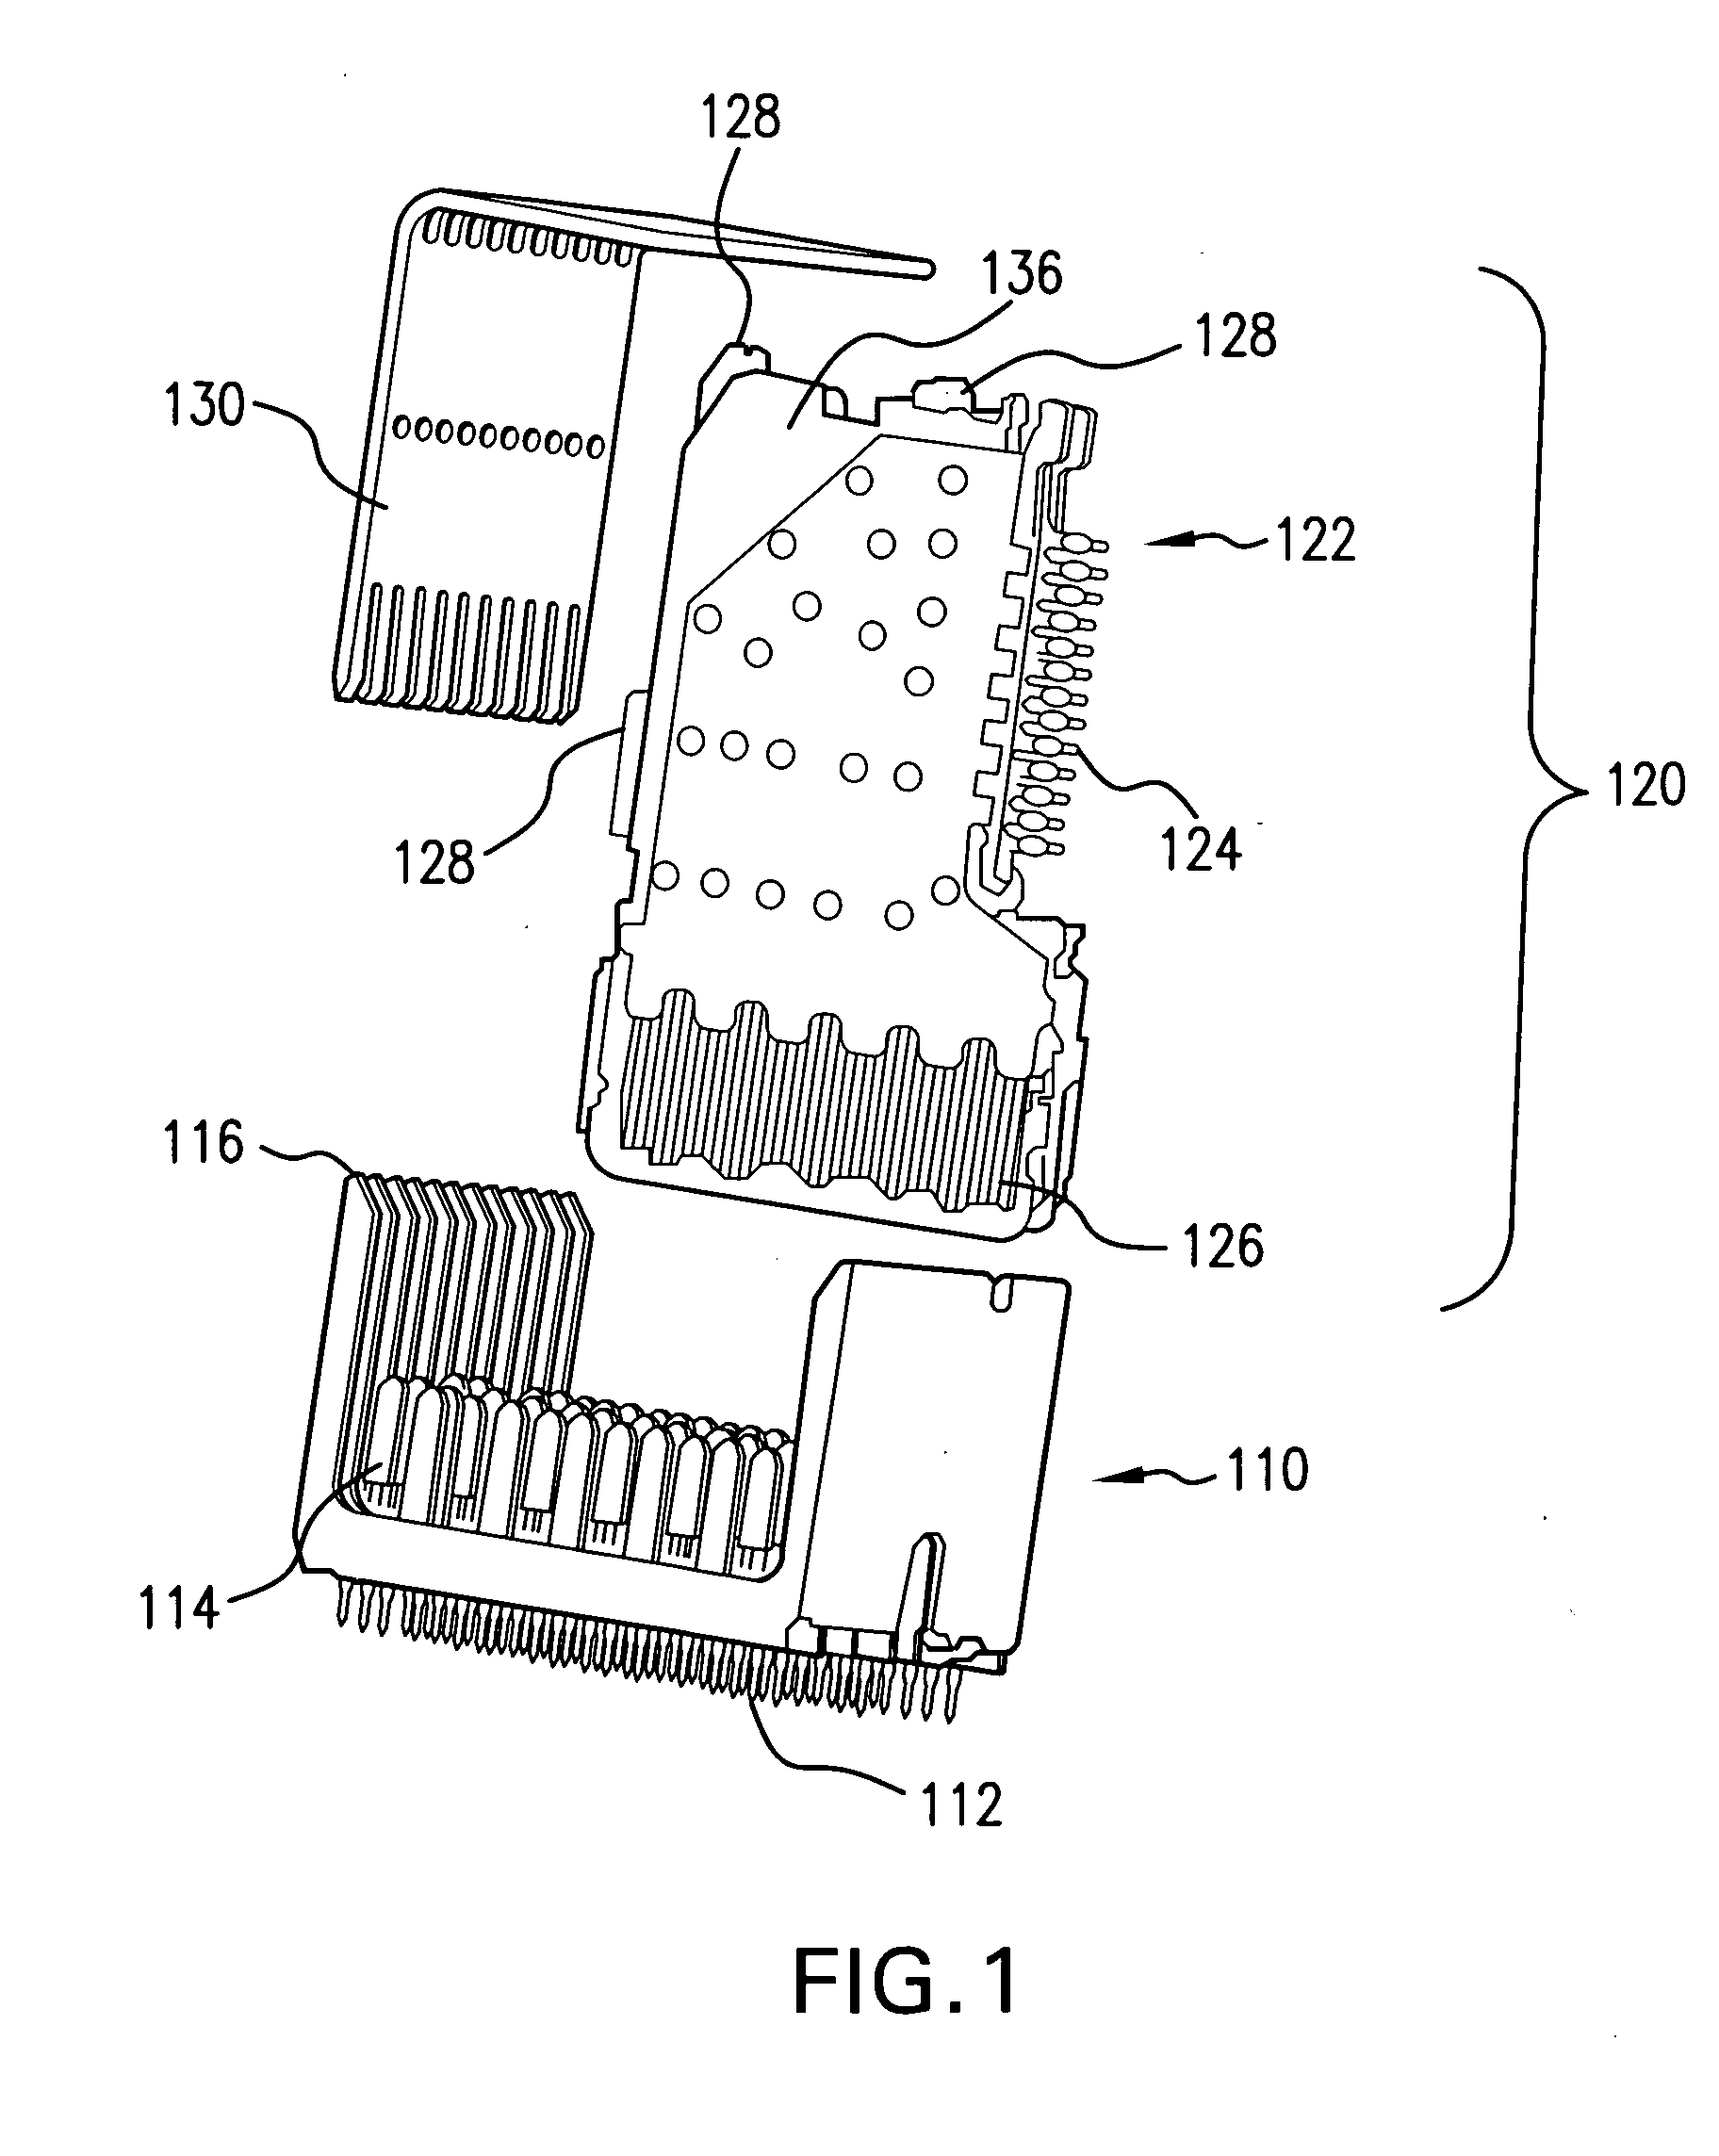 Connector with improved shielding in mating contact region